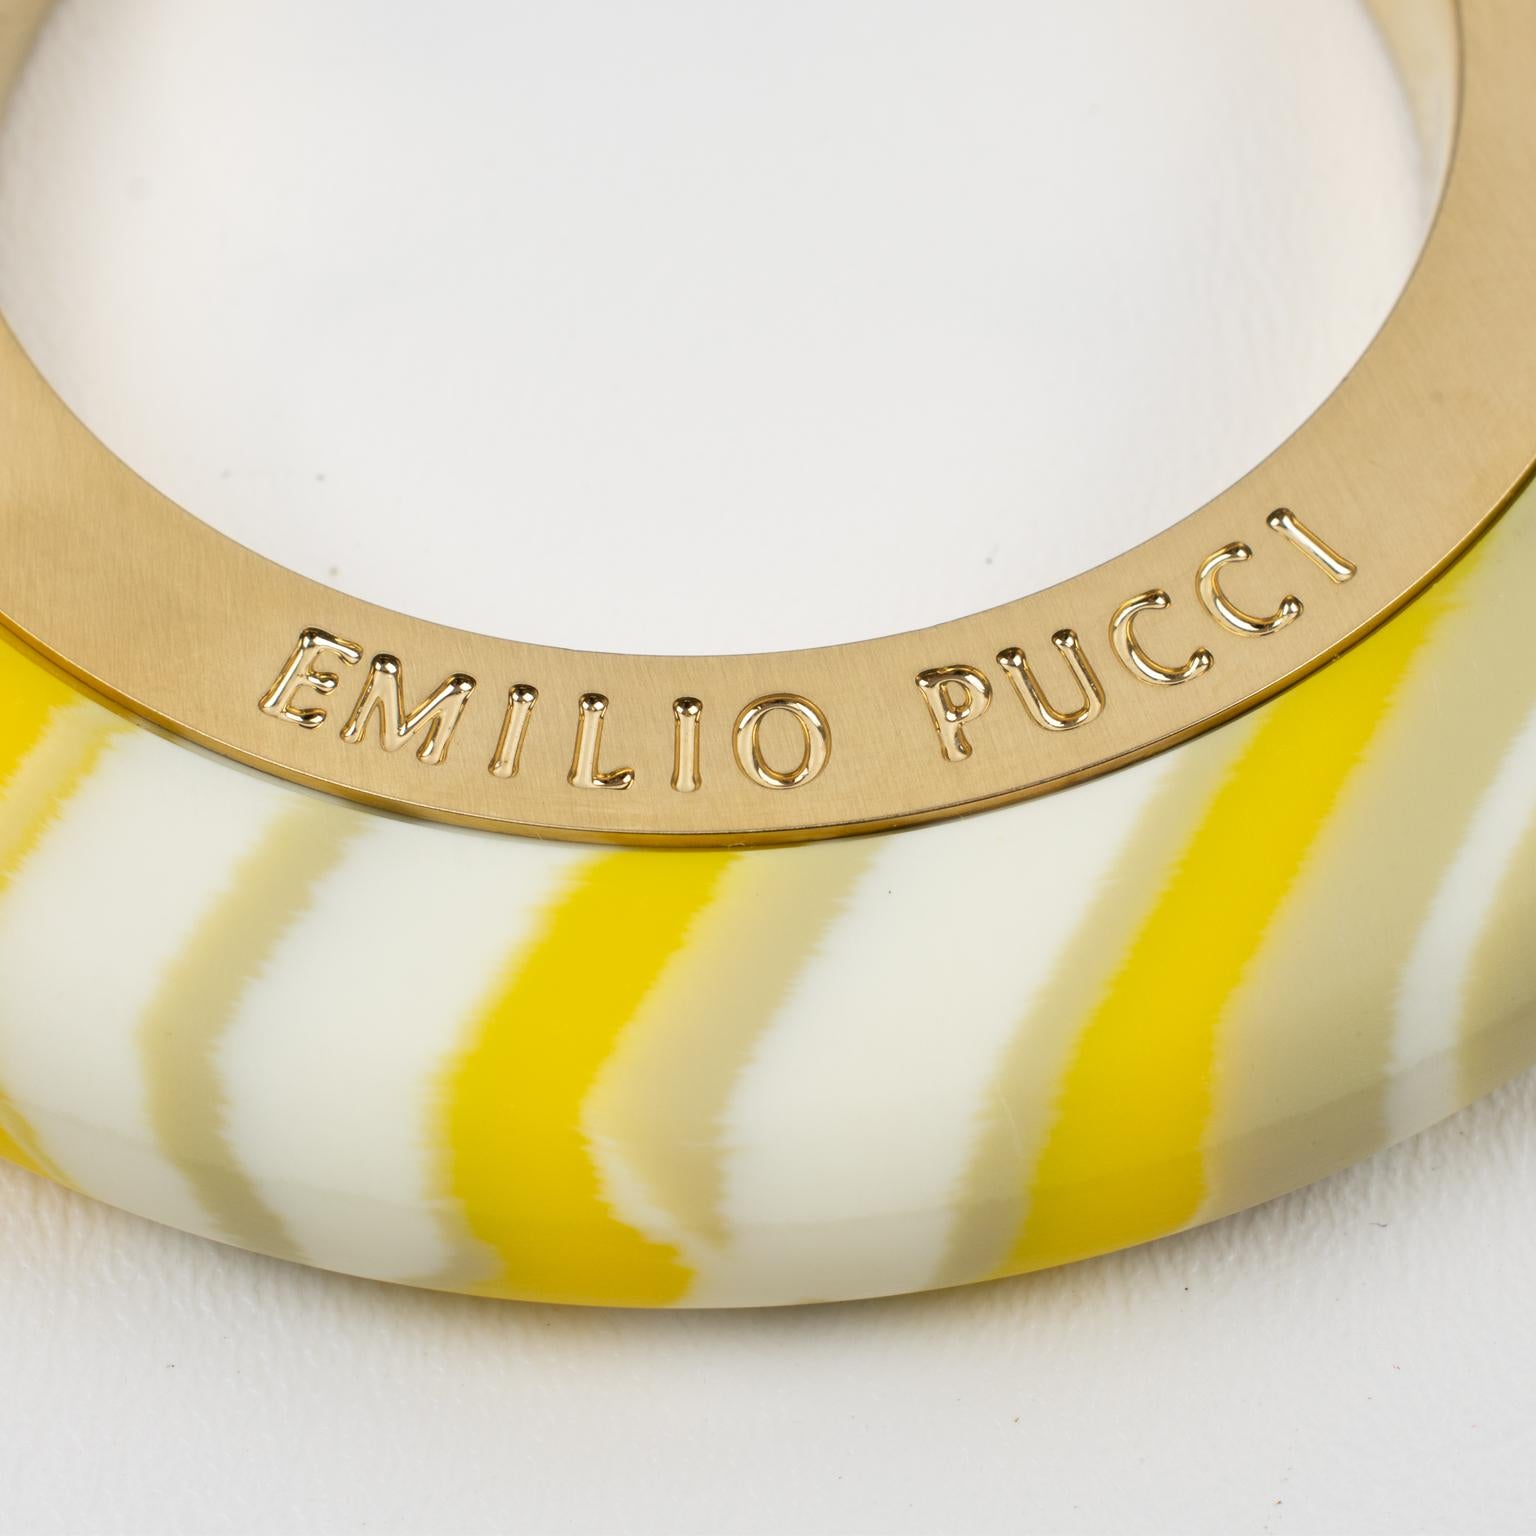 Women's or Men's Emilio Pucci Resin Bracelet Bangle Marble Effect Yellow, White and Gray